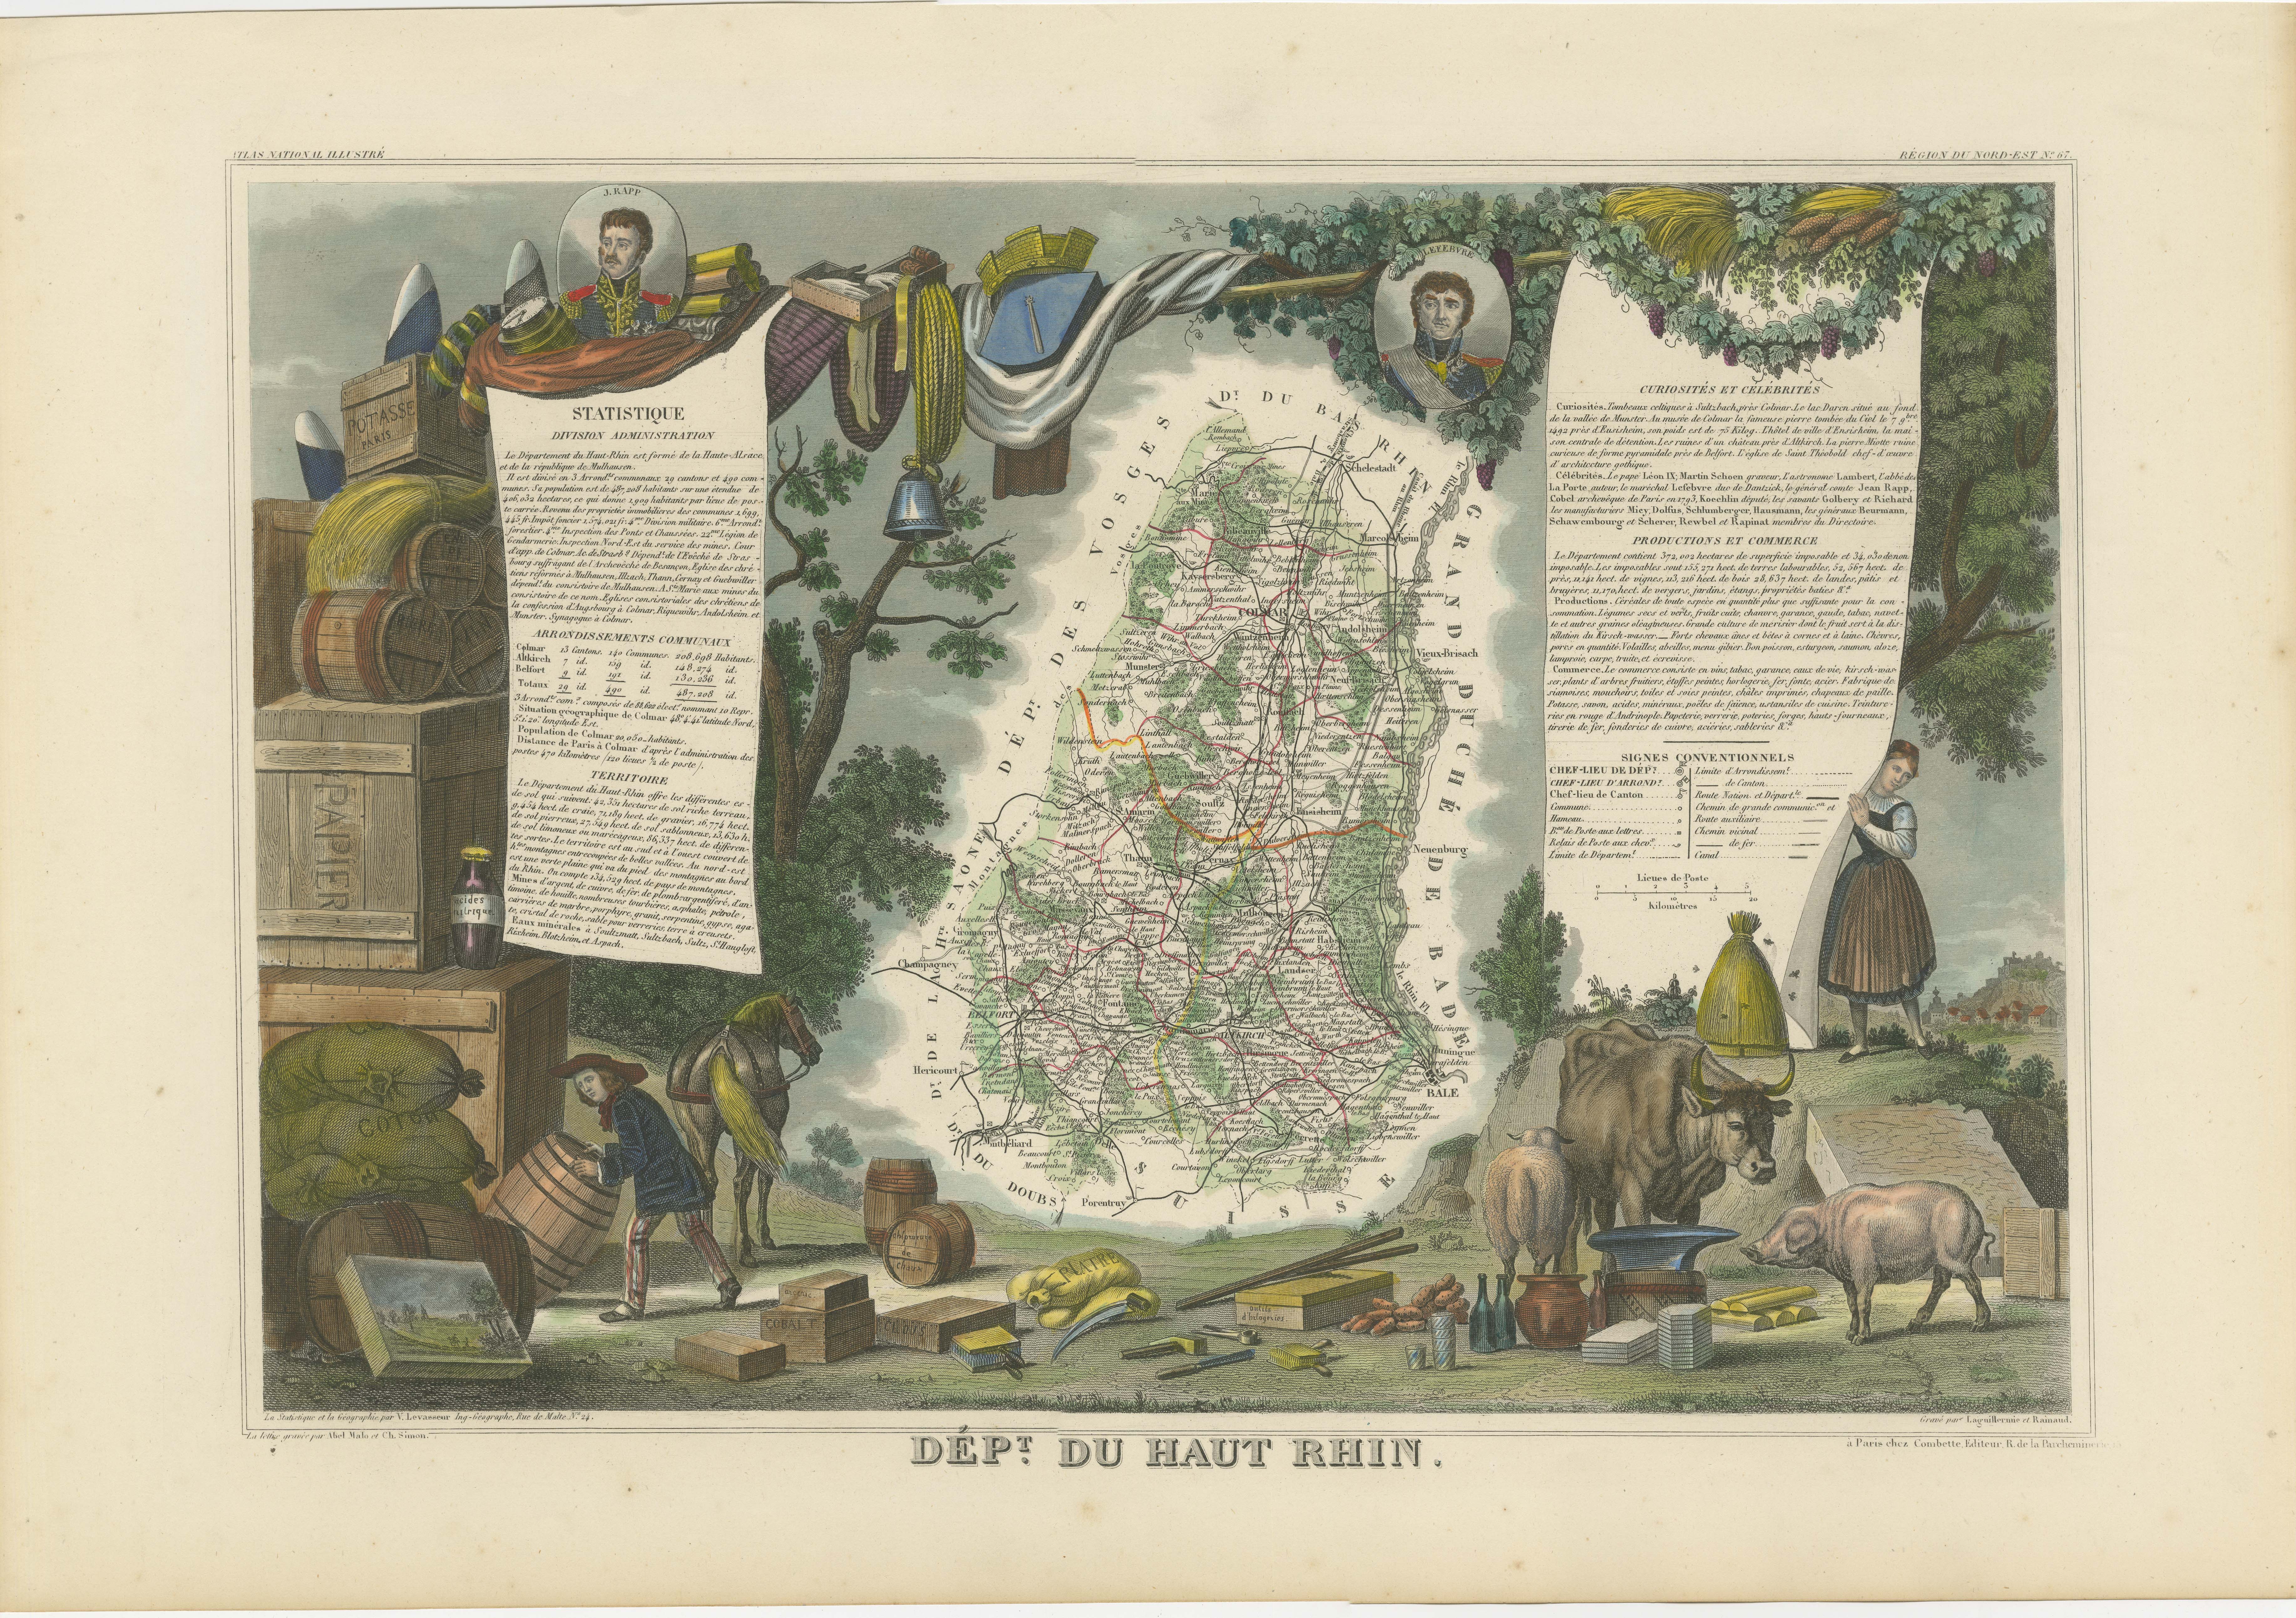 This original hand-colored map is from the 